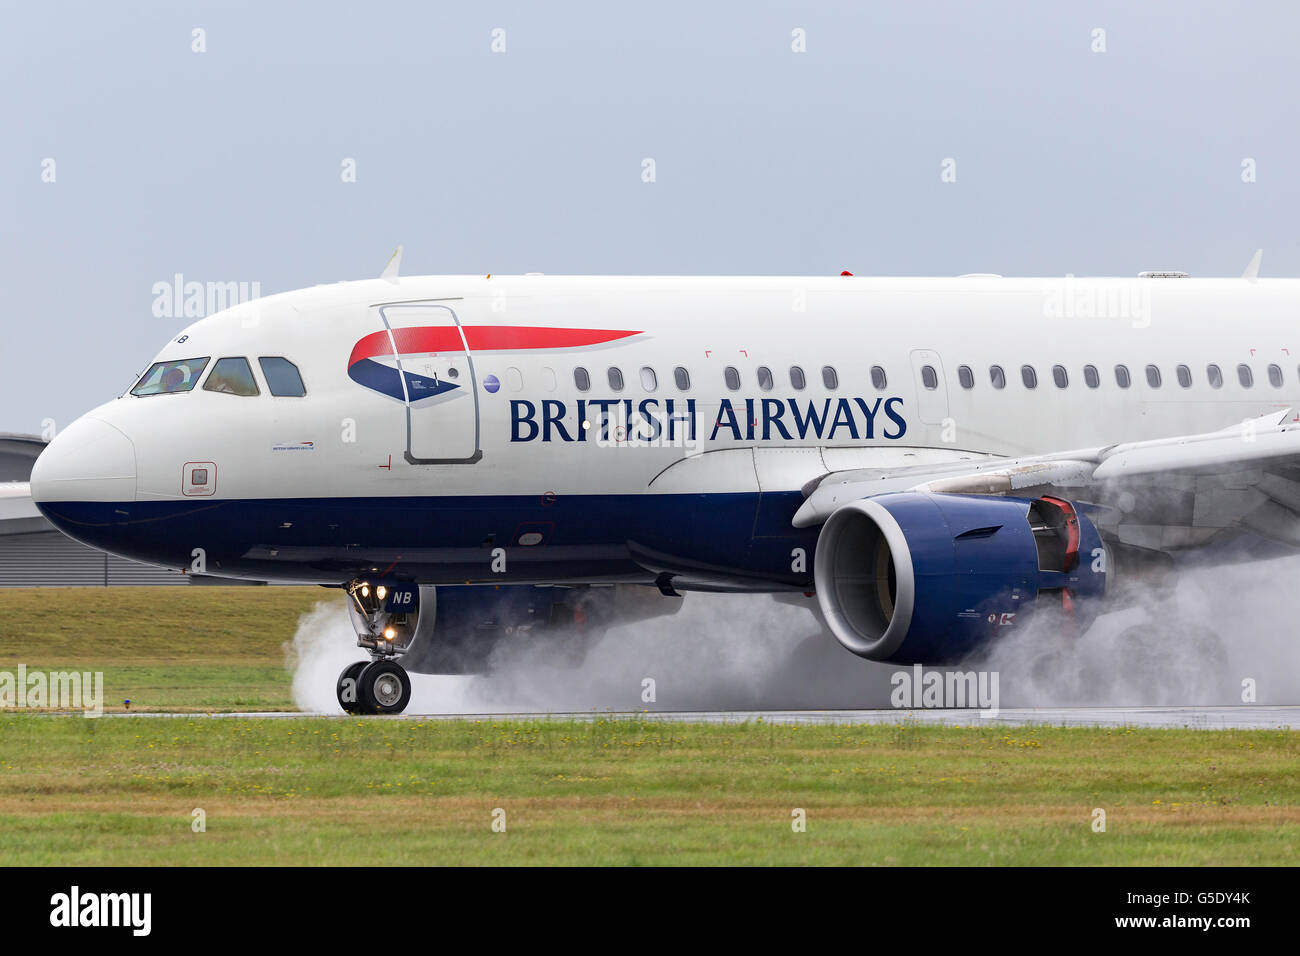 British Airways Airbus A318-112 aircraft arriving for static display at the Farnborough International Airshow G-EUNB Stock Photo